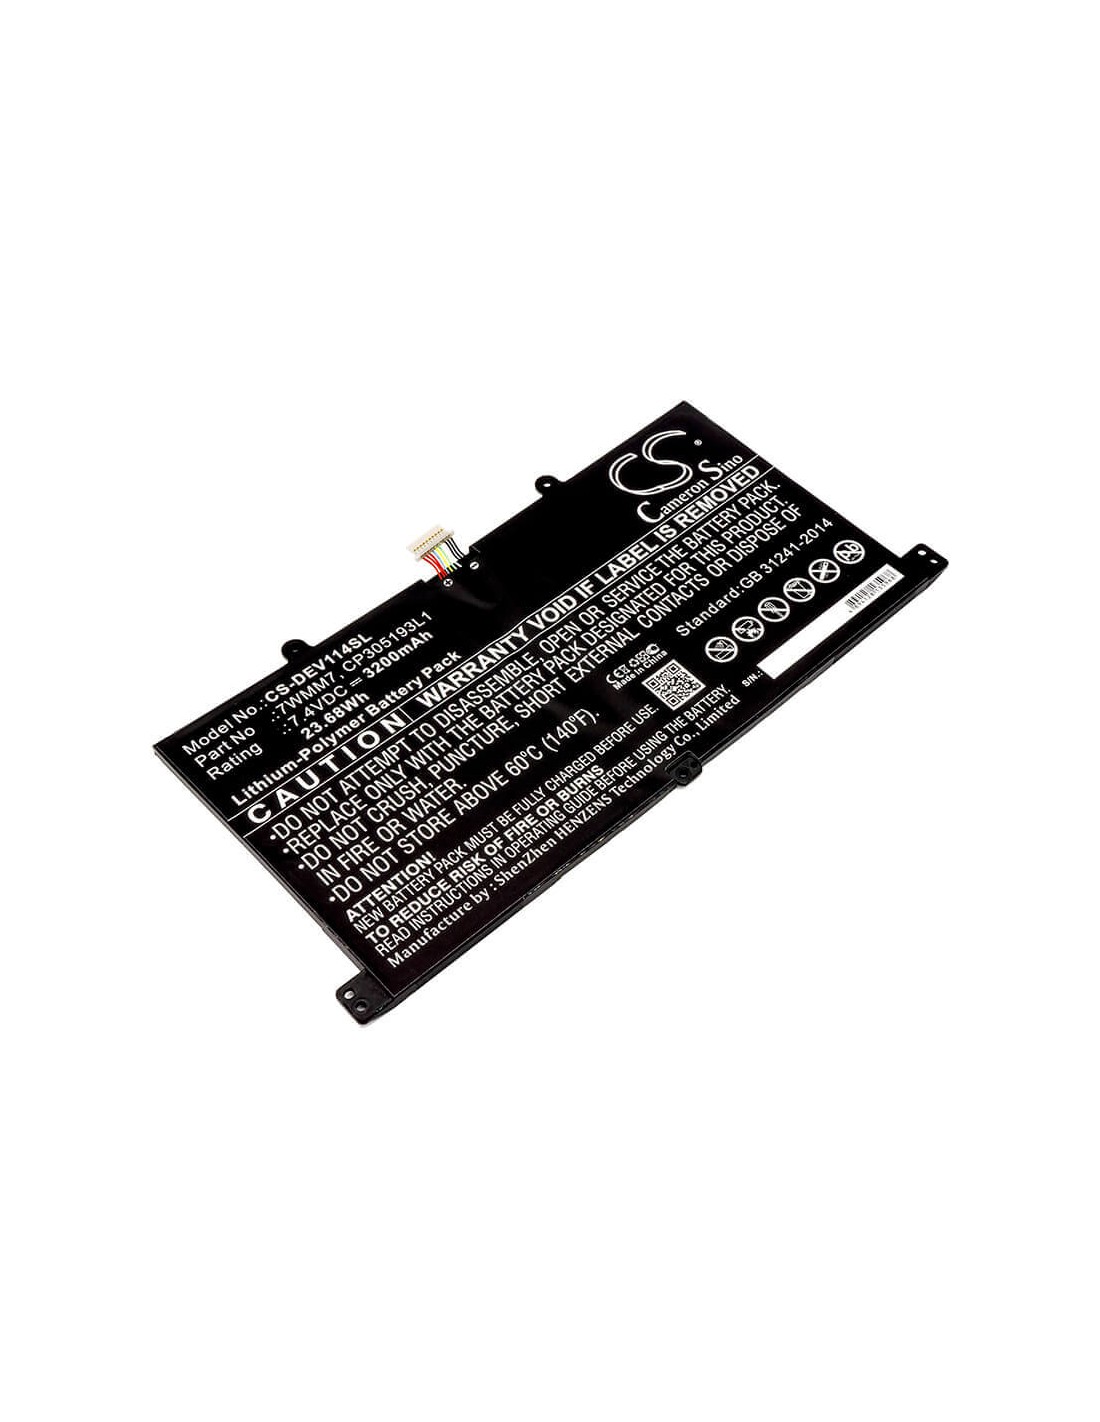 Battery for Dell Venue 11 Pro Keyboard Dock, D1r74, Cfc6c 7.4V, 3200mAh - 23.68Wh